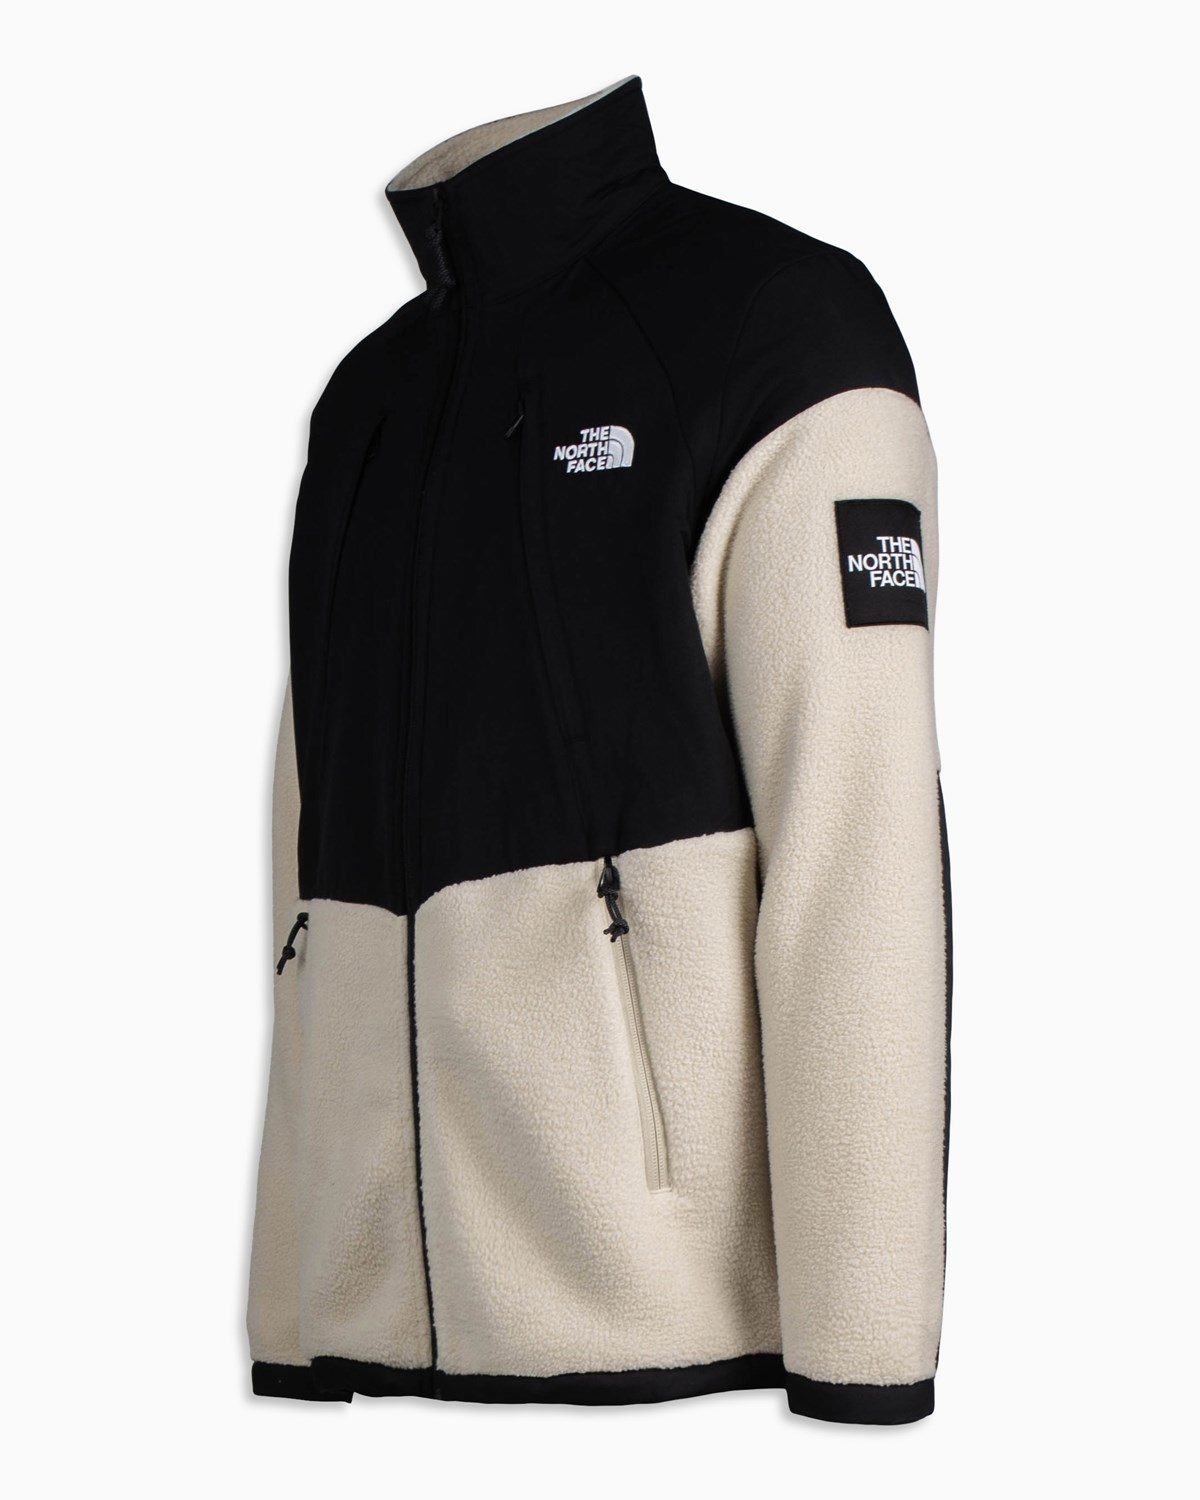 Phlego Denali The North Face Outerwear Jackets Beige